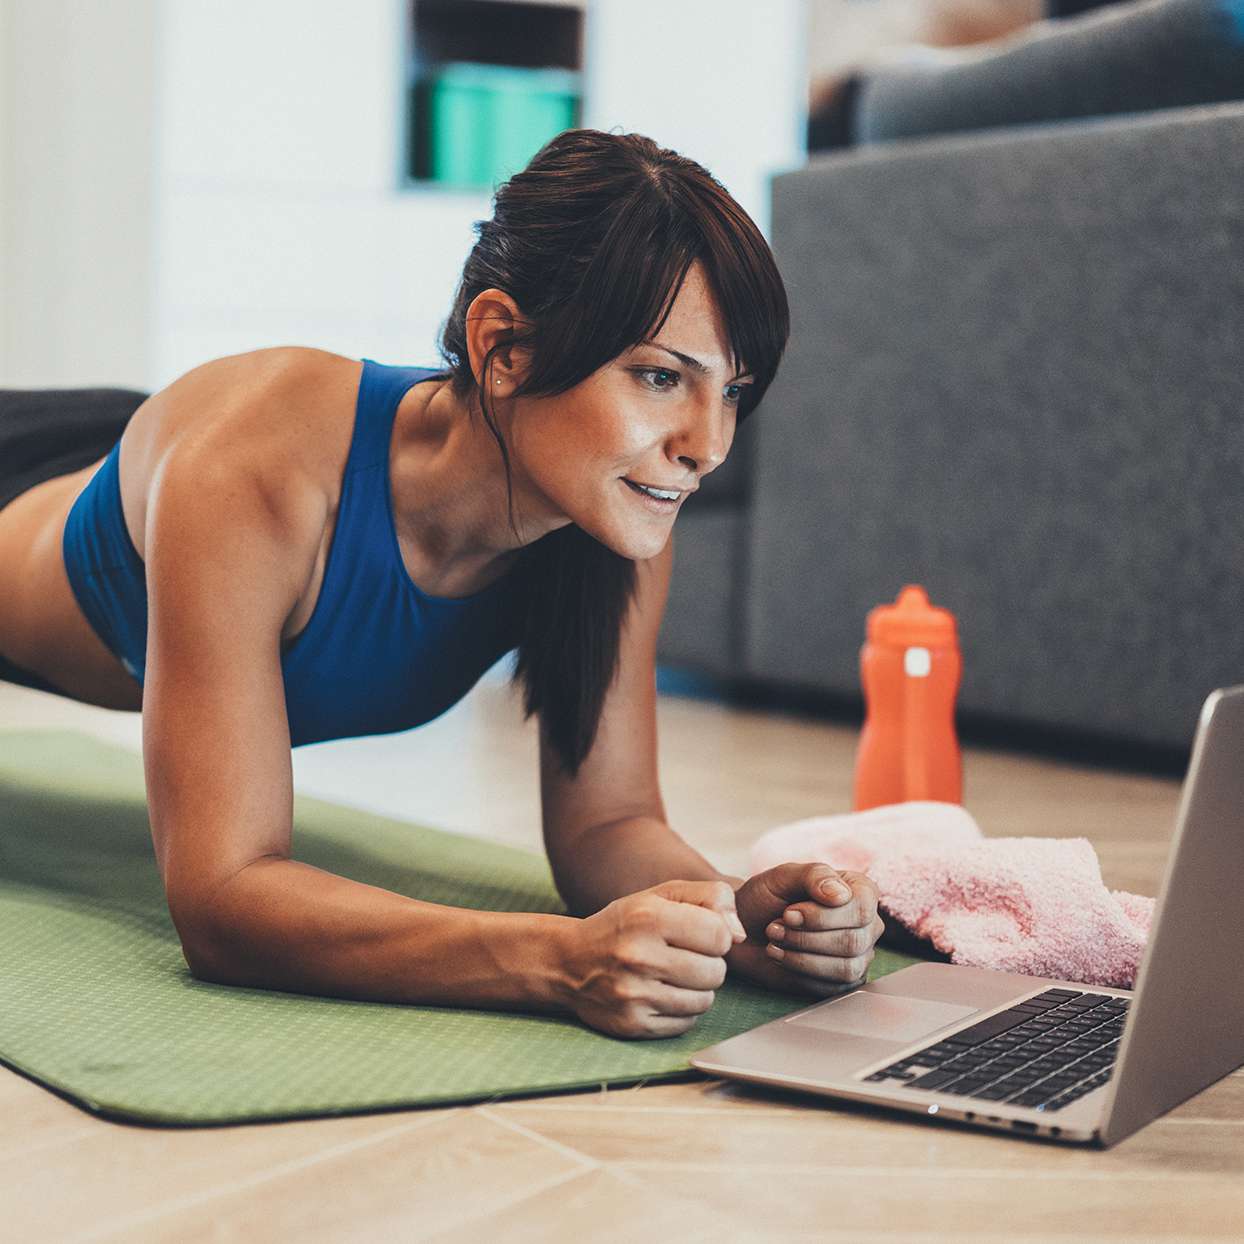 13 YouTube Accounts to Follow for the Best Workout Videos